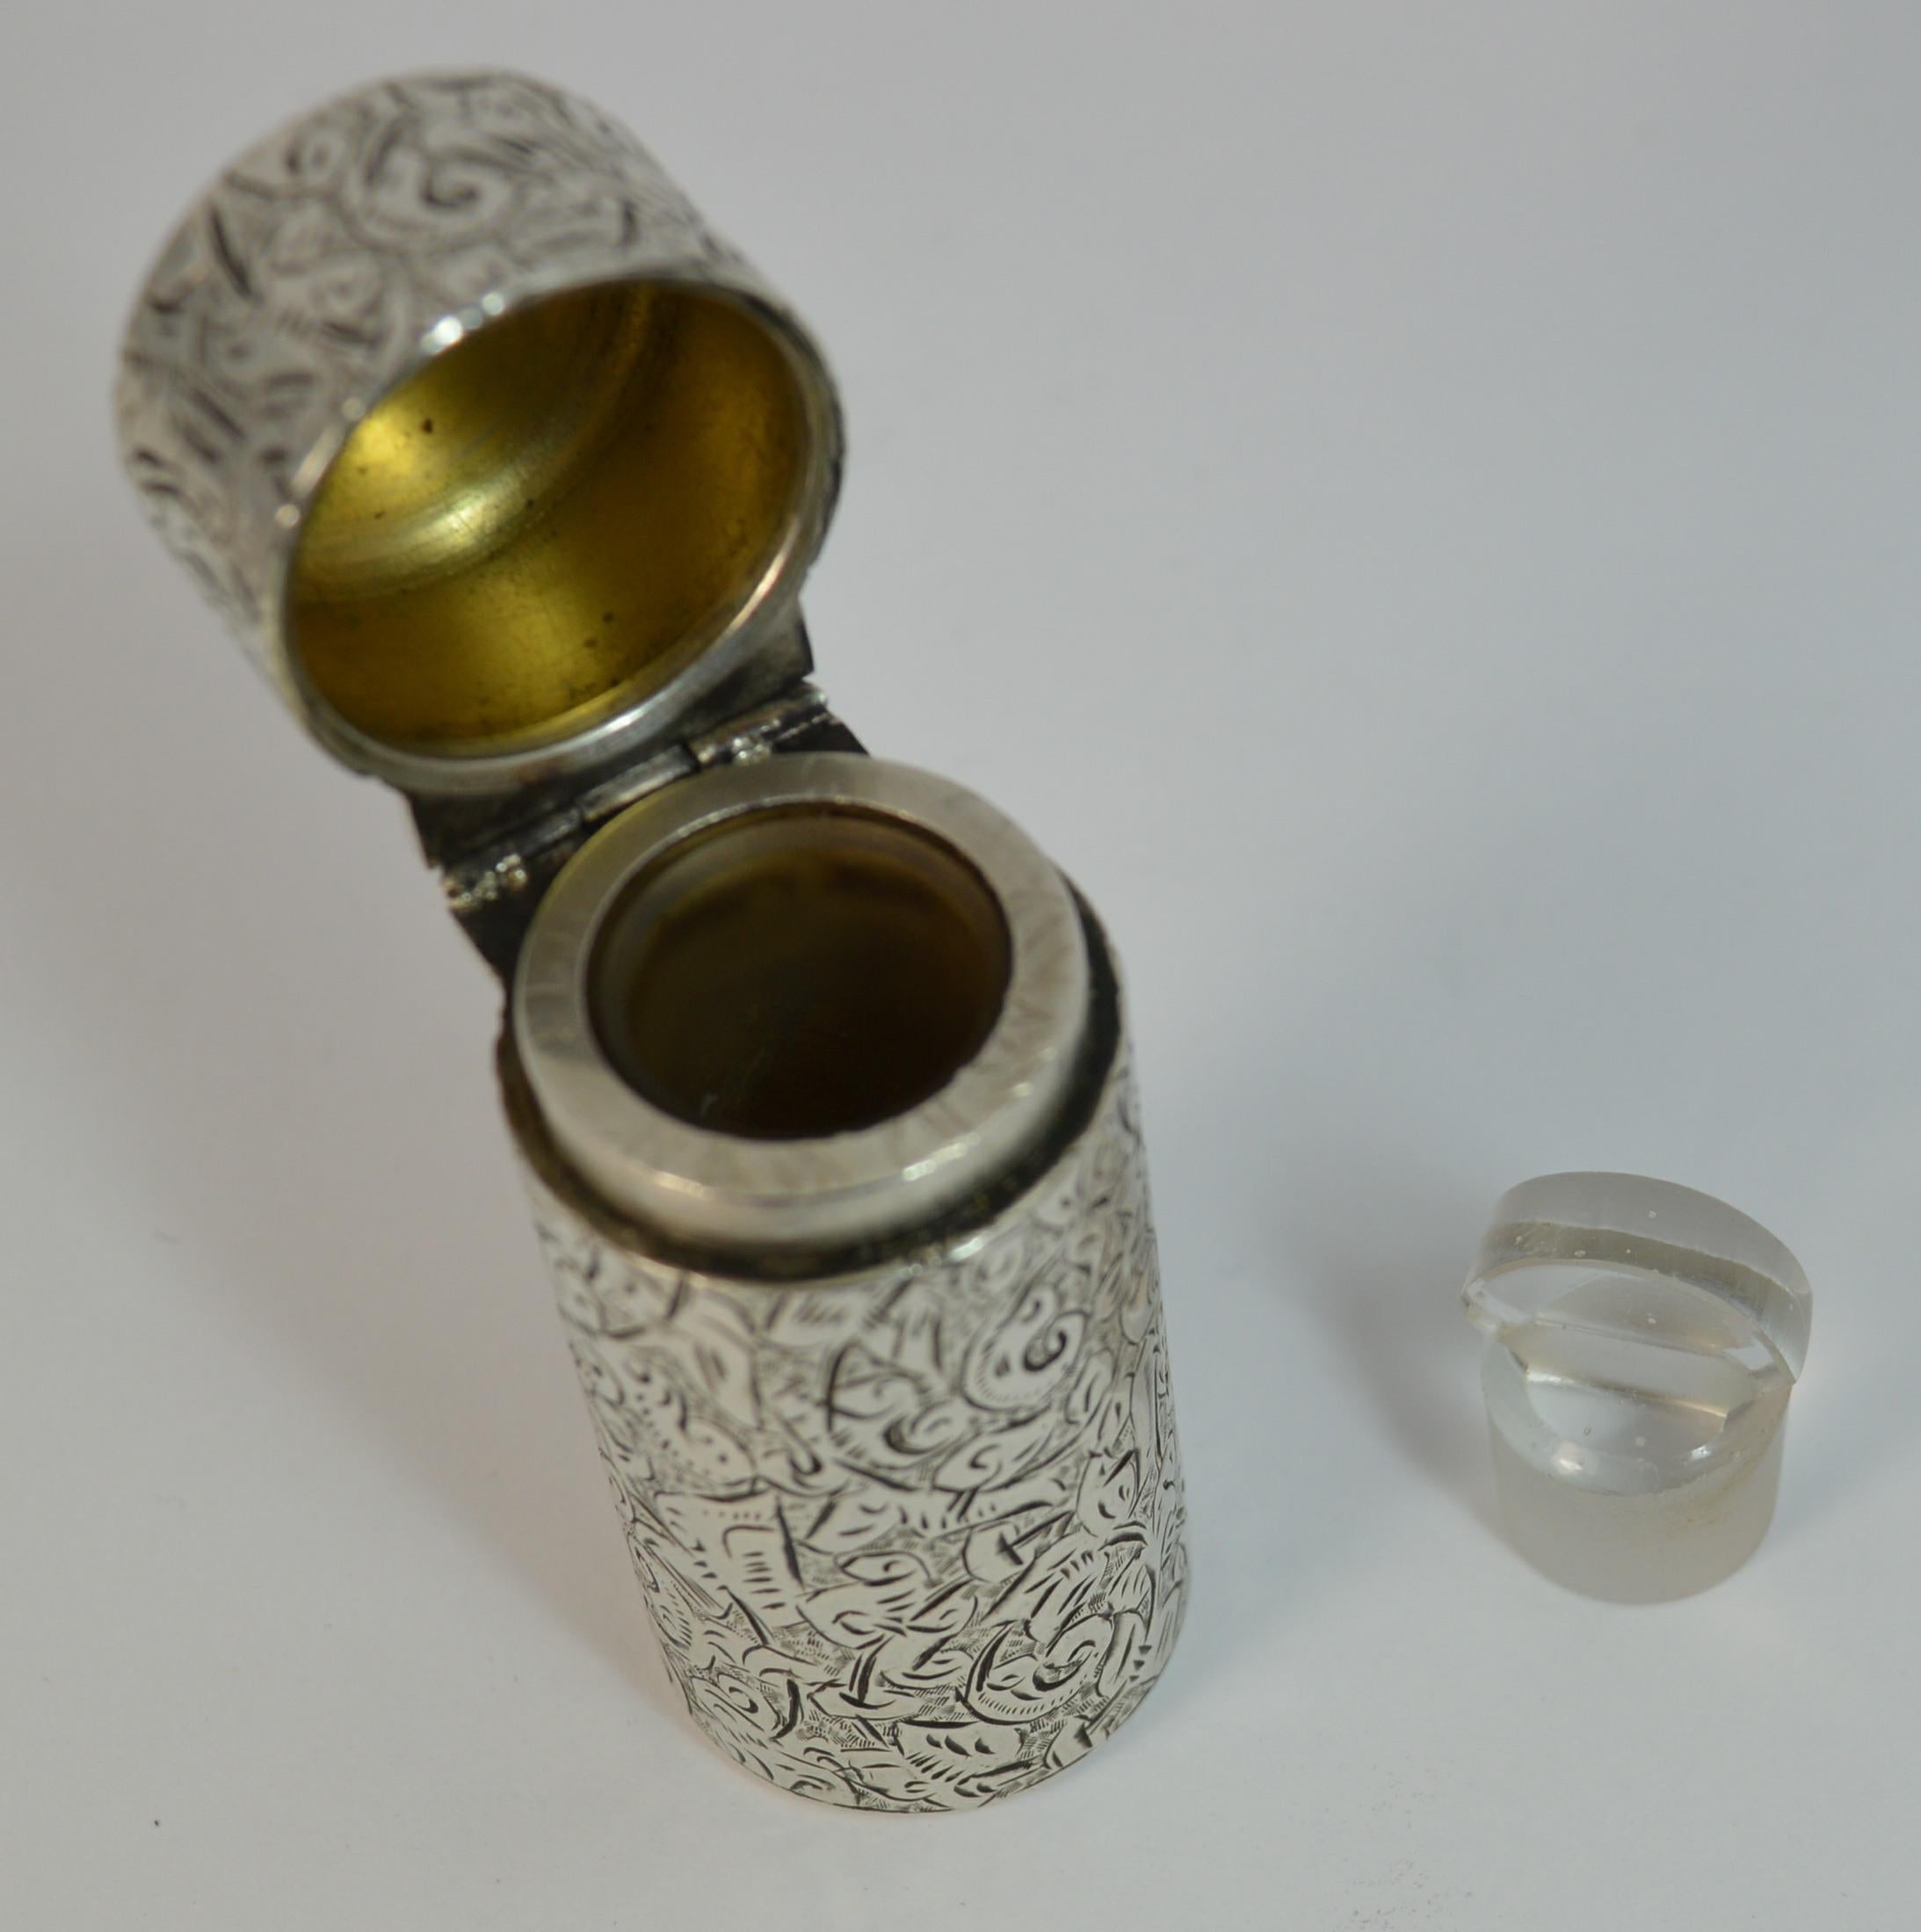 Rare Sampson Mordan & Co. Solid Silver Scent Bottle and Stopper 4